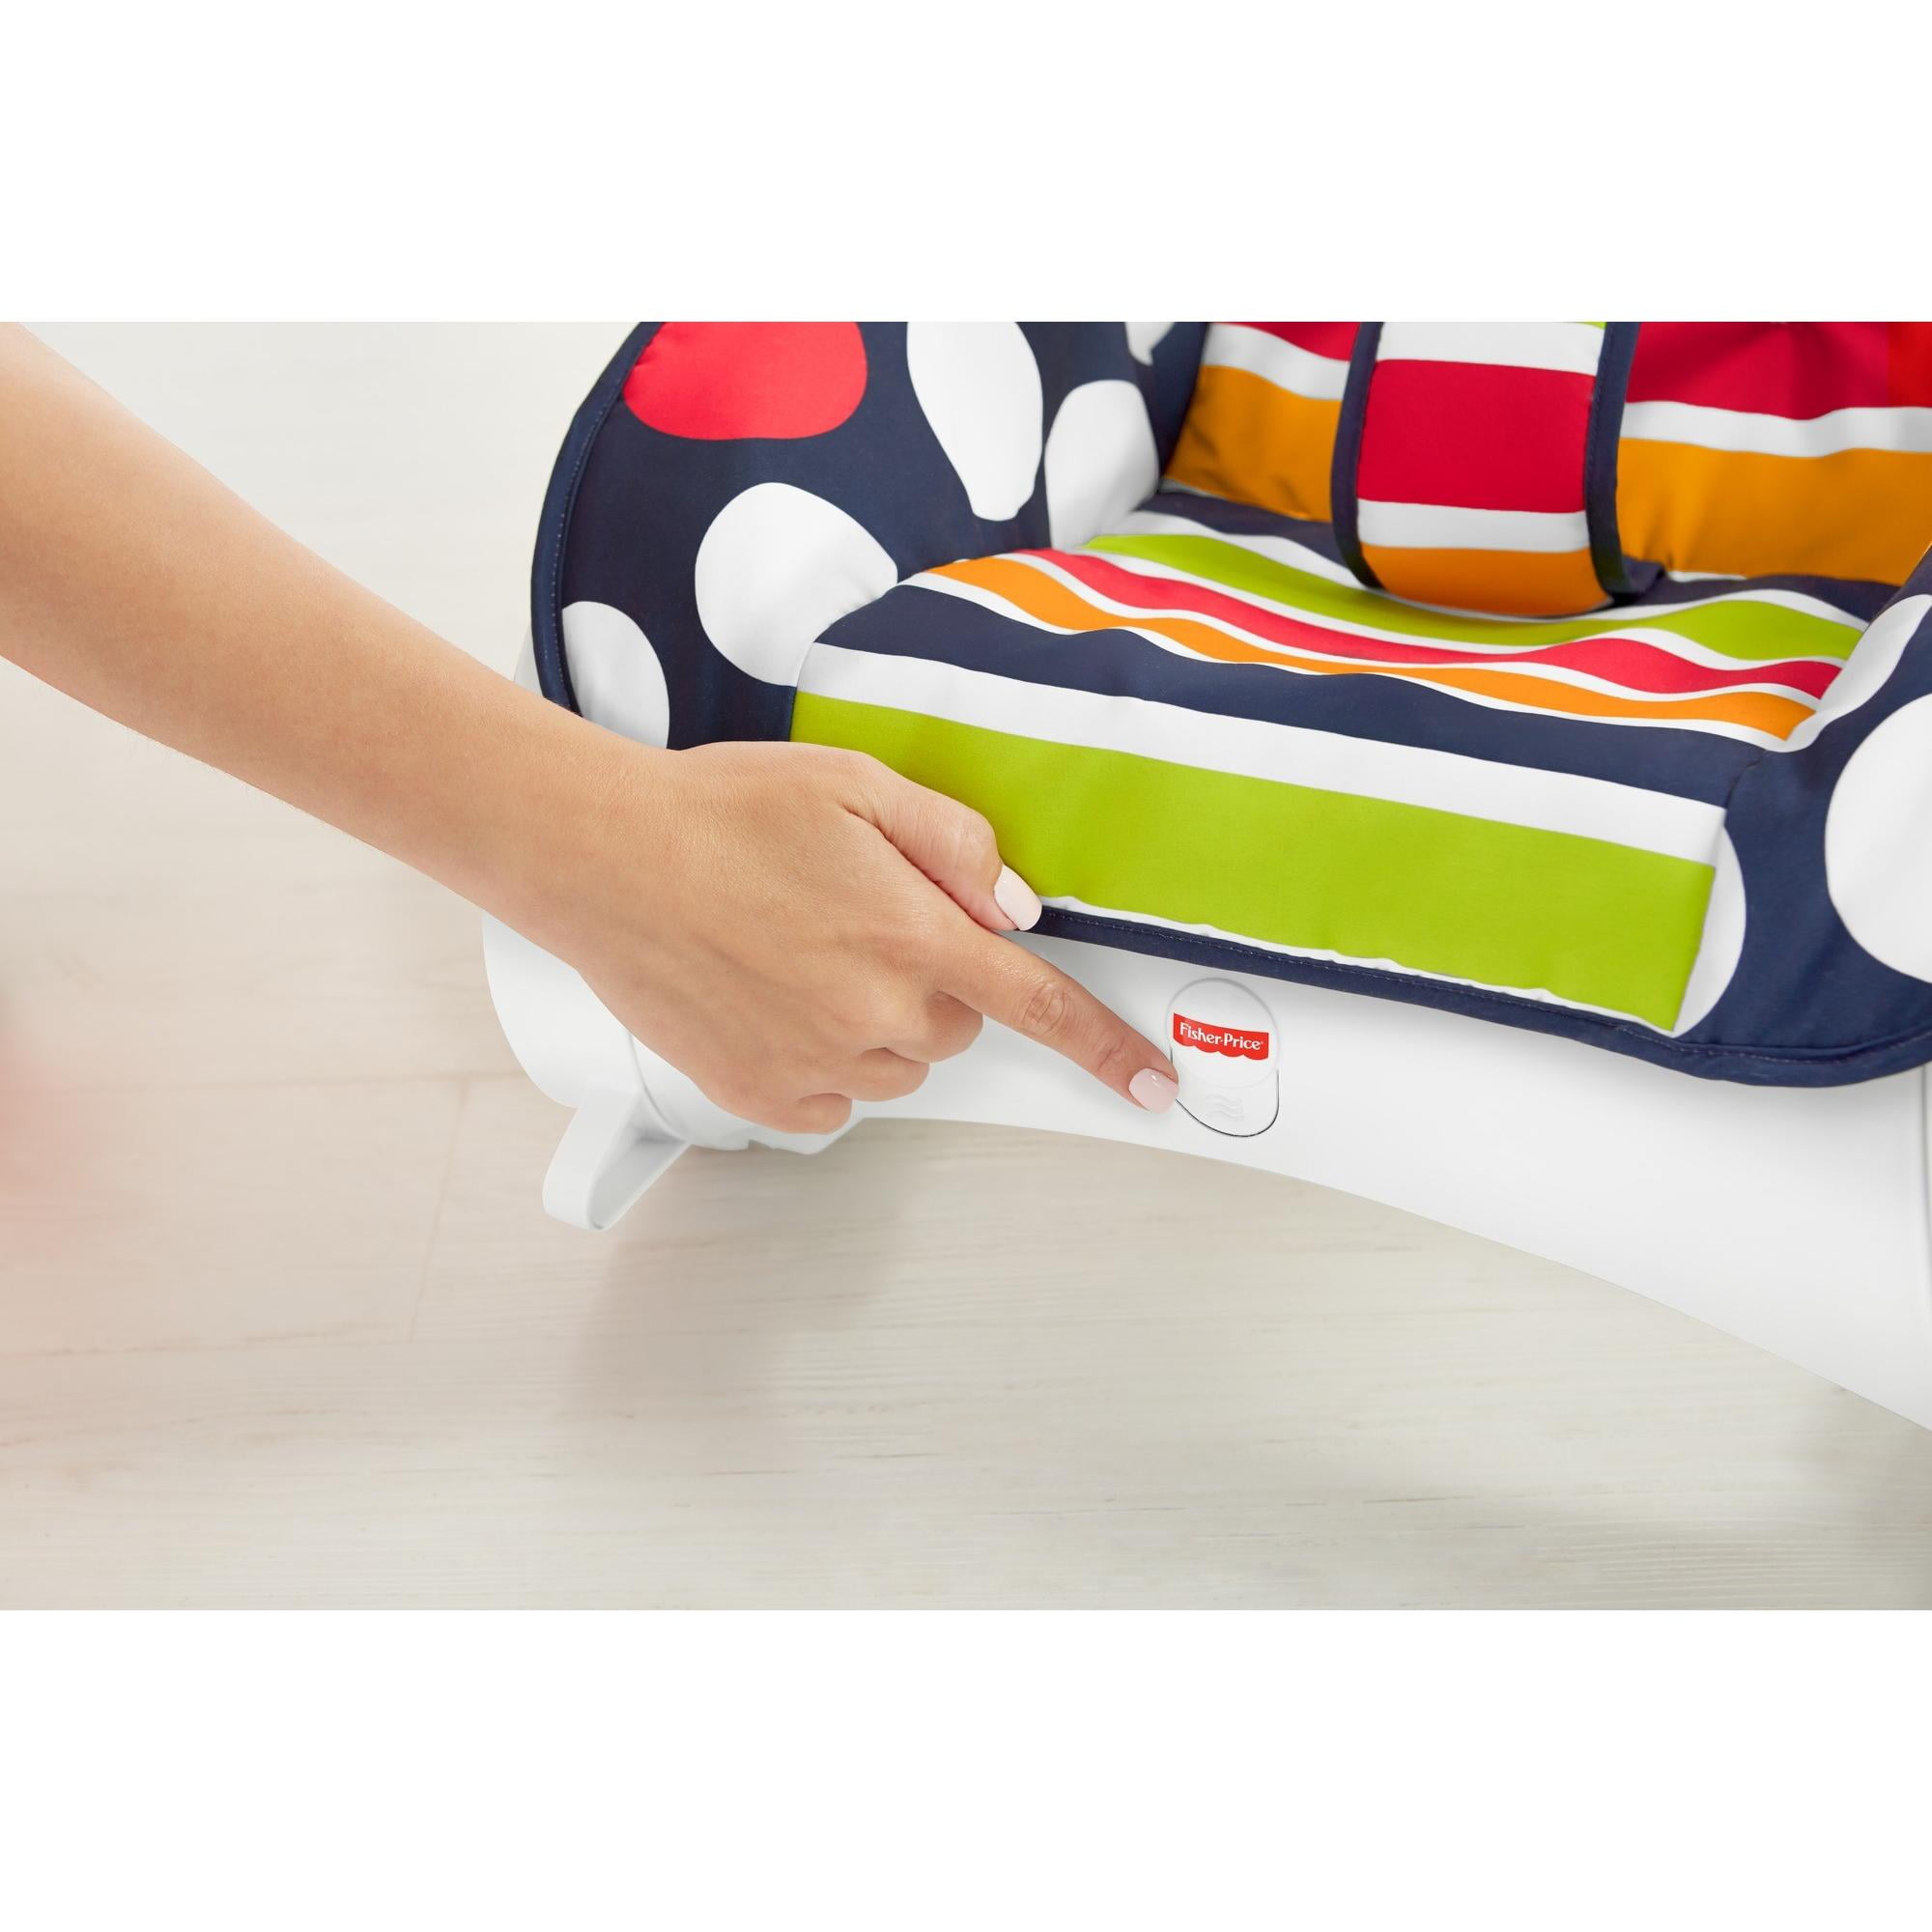 fisher price infant to toddler rocker navy dots